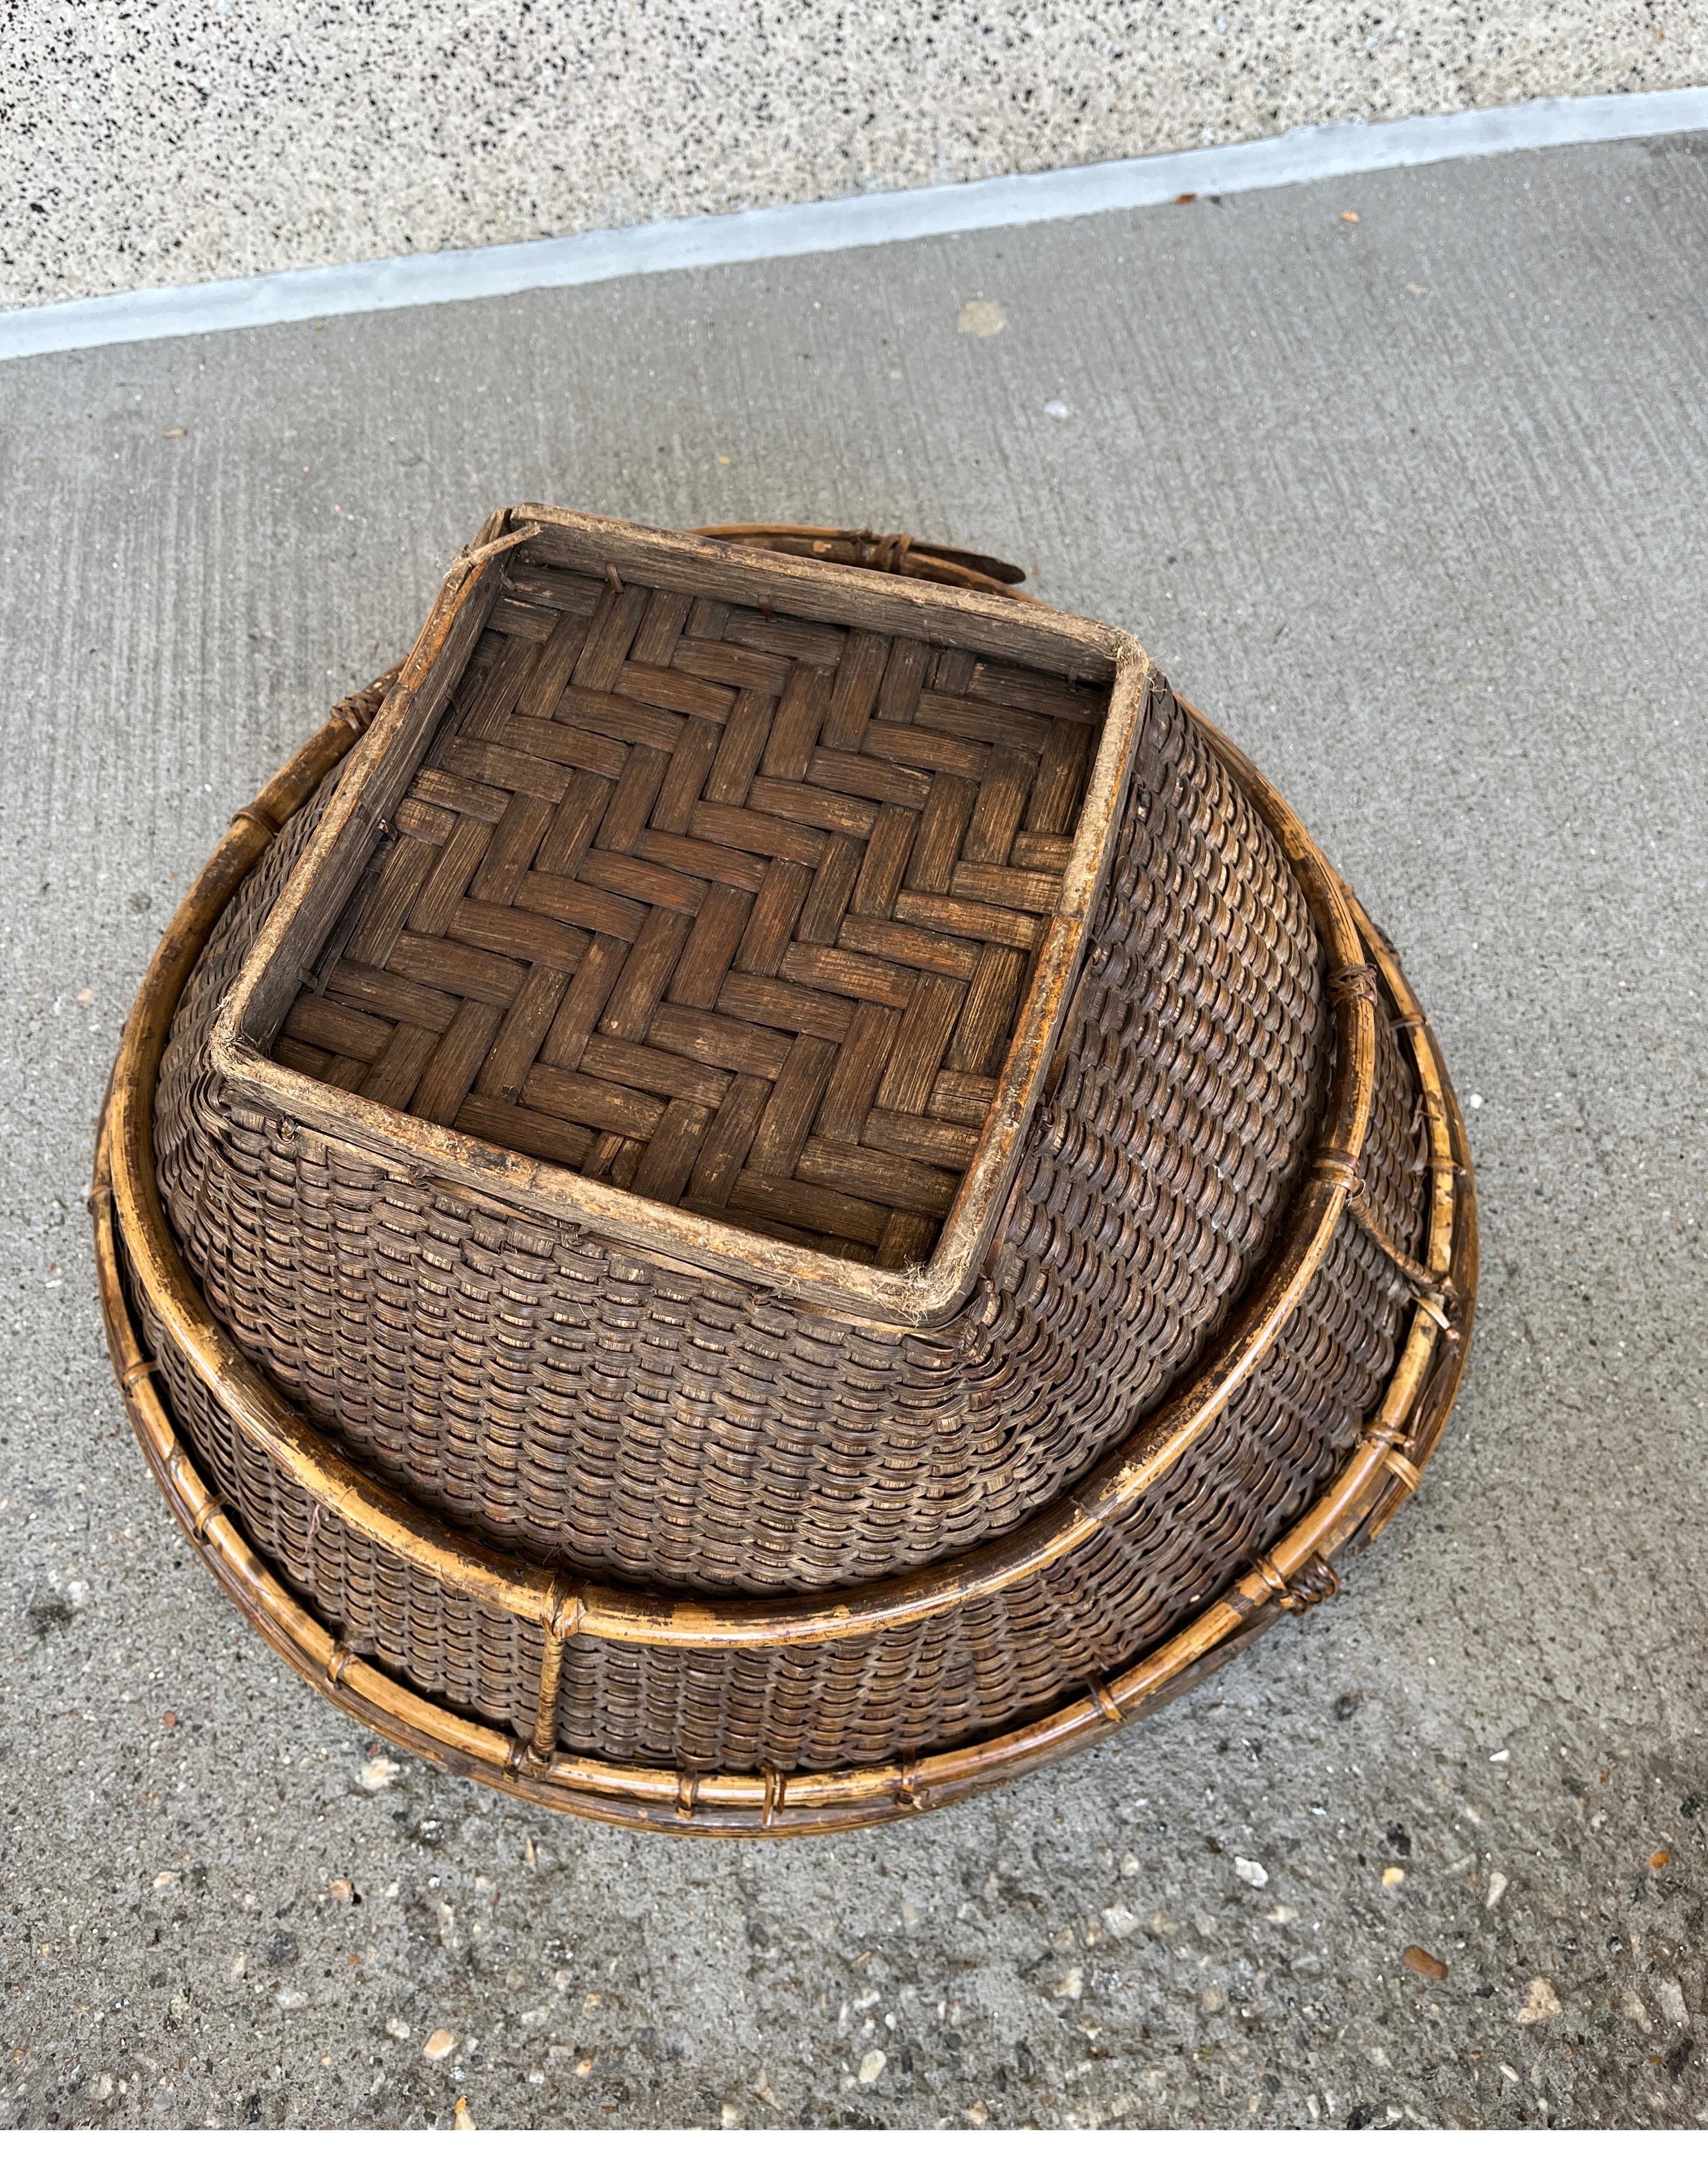 Contemporary Woven Basket, Phillipines 9